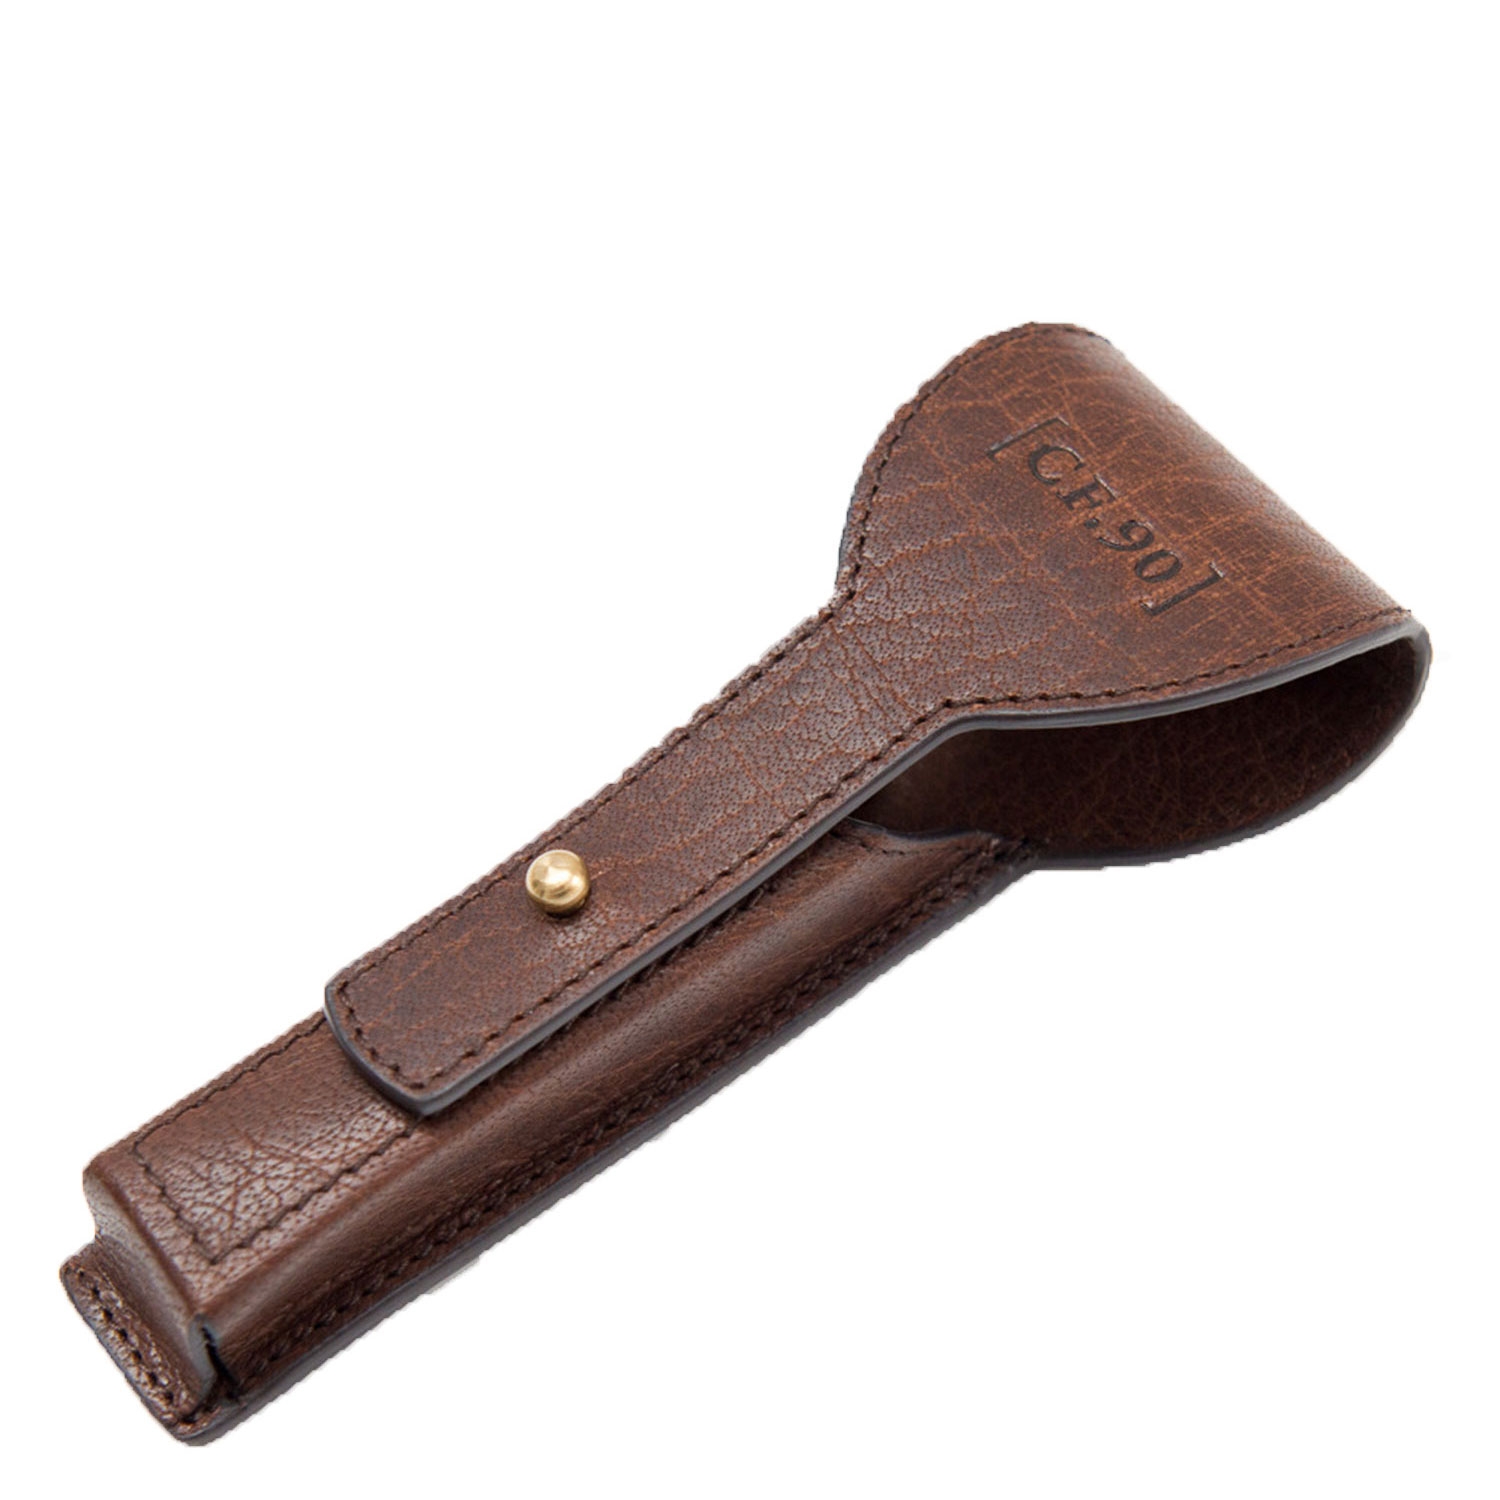 Product image from Capt. Fawcett Tools - Handcrafted Leather Razor Case